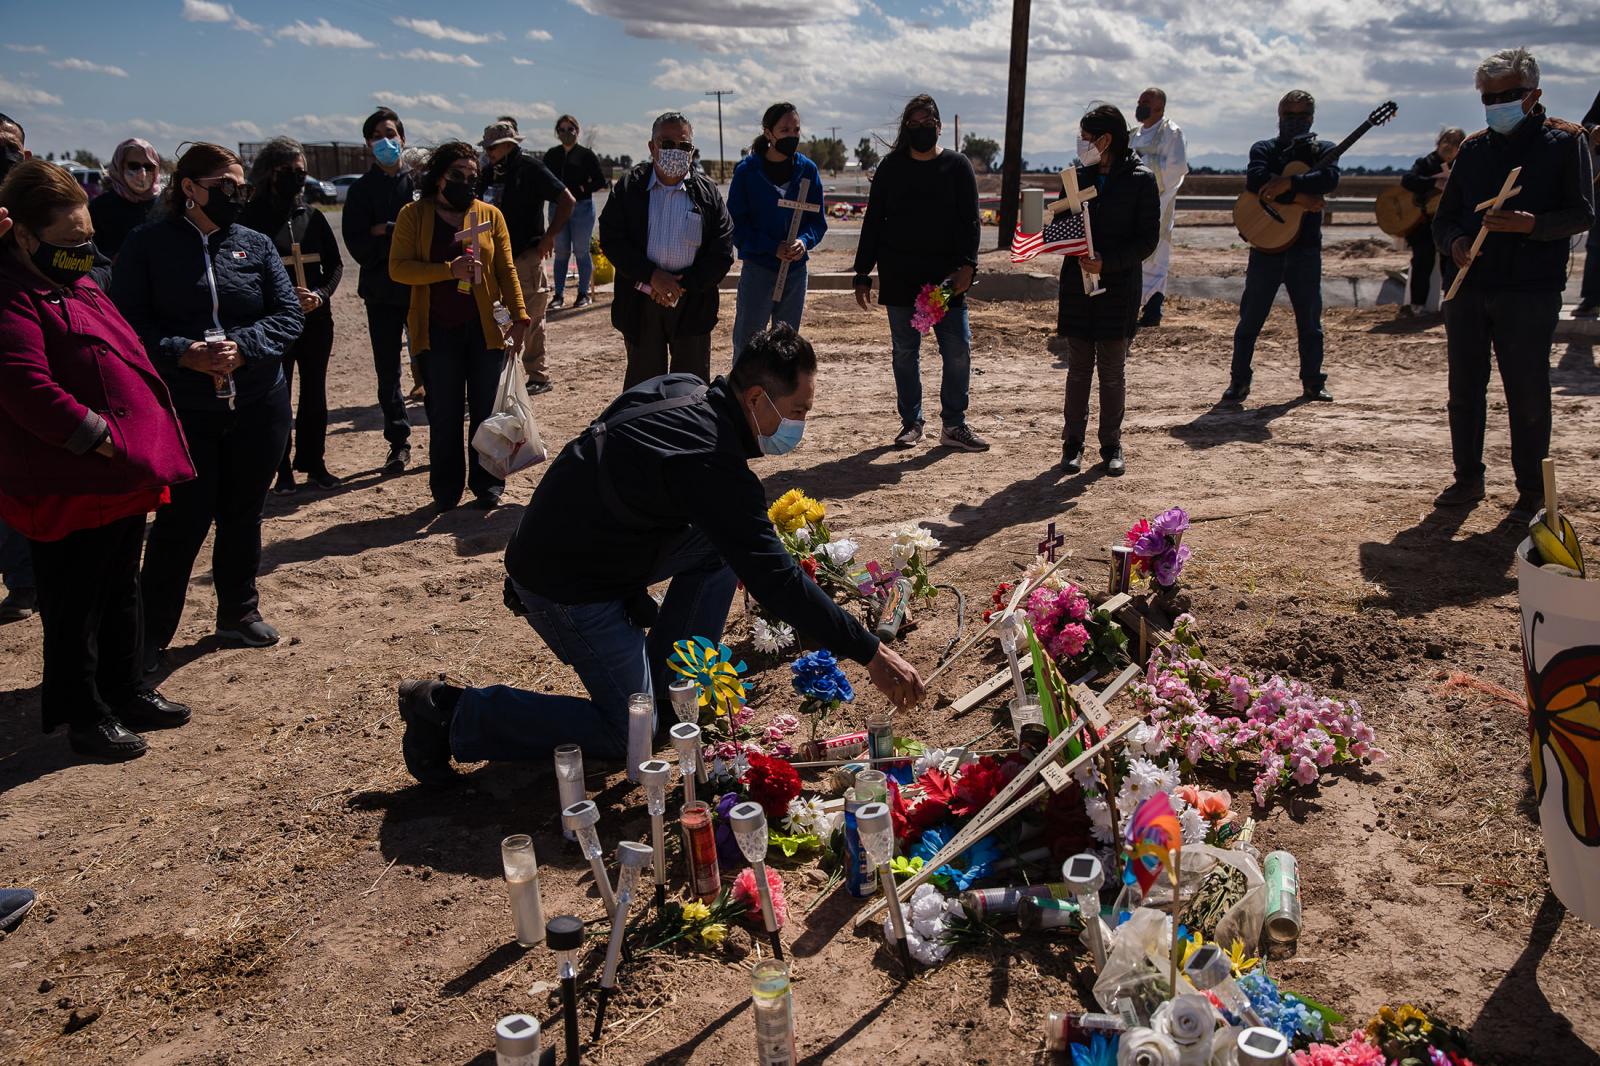 A vigil for the 13 undocumented immigrants who died in early March when an SUV and a tractor-trailer collided near Holtville, California is held at the crash site on March 10, 2021. Mourners lay crosses down with the victims names representing all 13 who lost their lives.